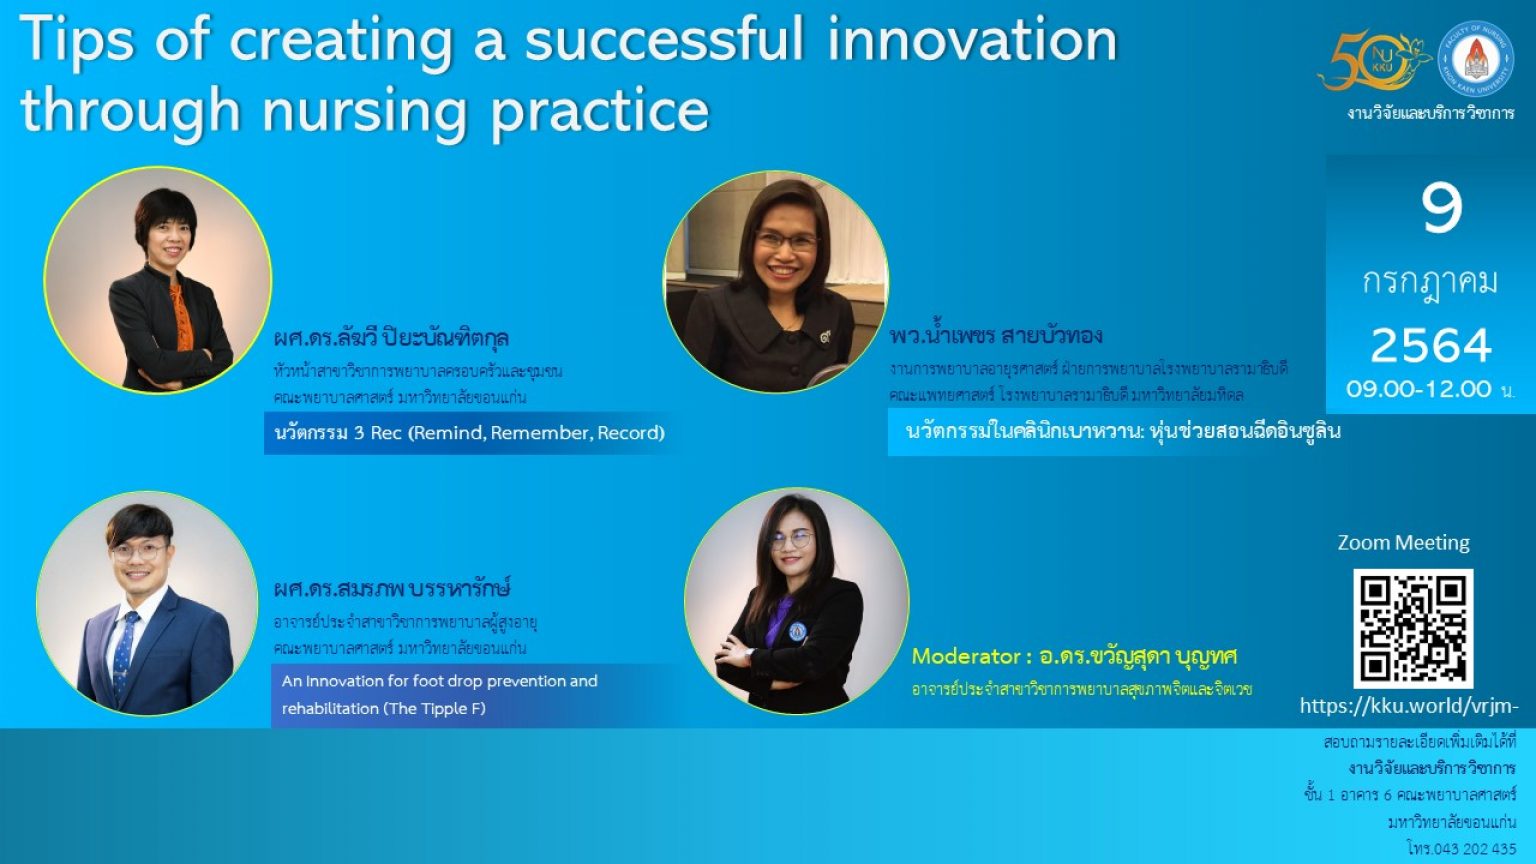 Tips of creating a successful innovation through nursing practice